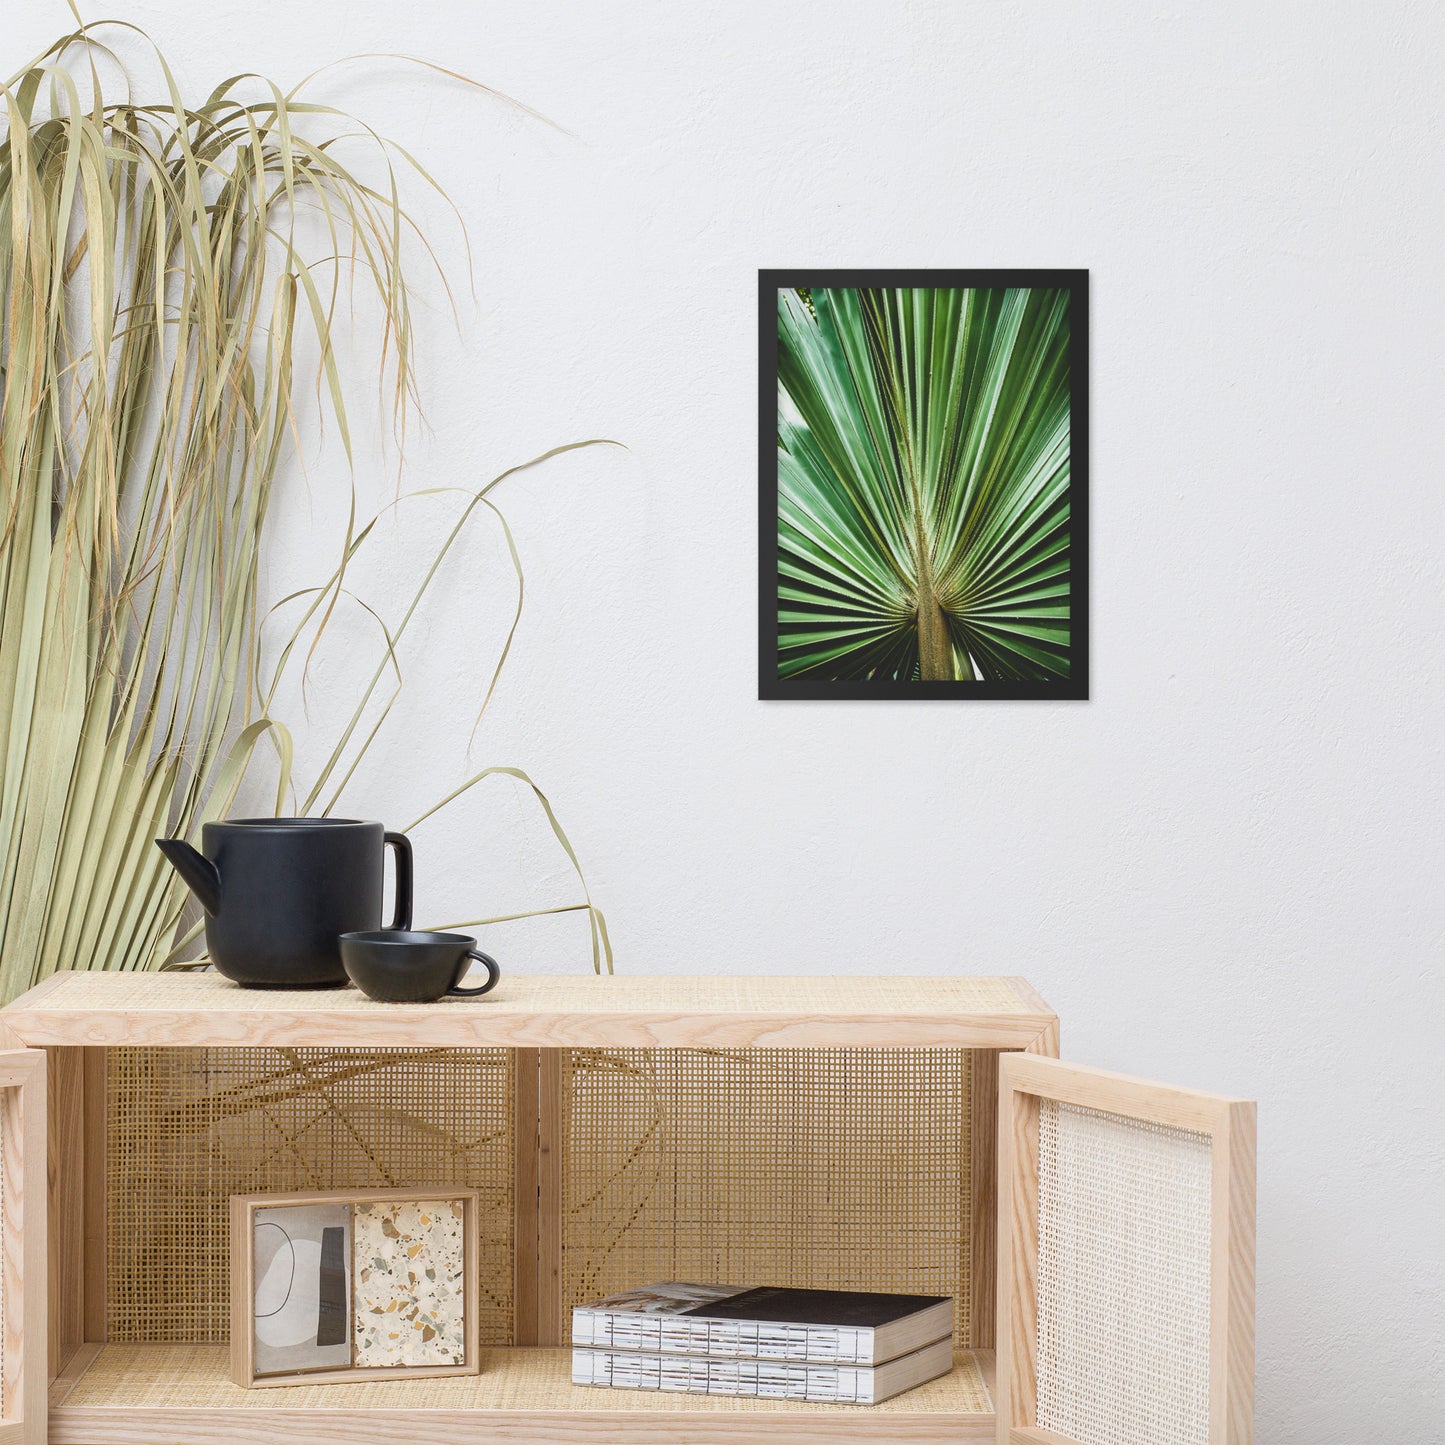 Framed Pictures For Dining Room: Aged and Colorized Wide Palm Leaves 2 Tropical Botanical / Nature Photo Framed Wall Art Print - Artwork - Wall Decor